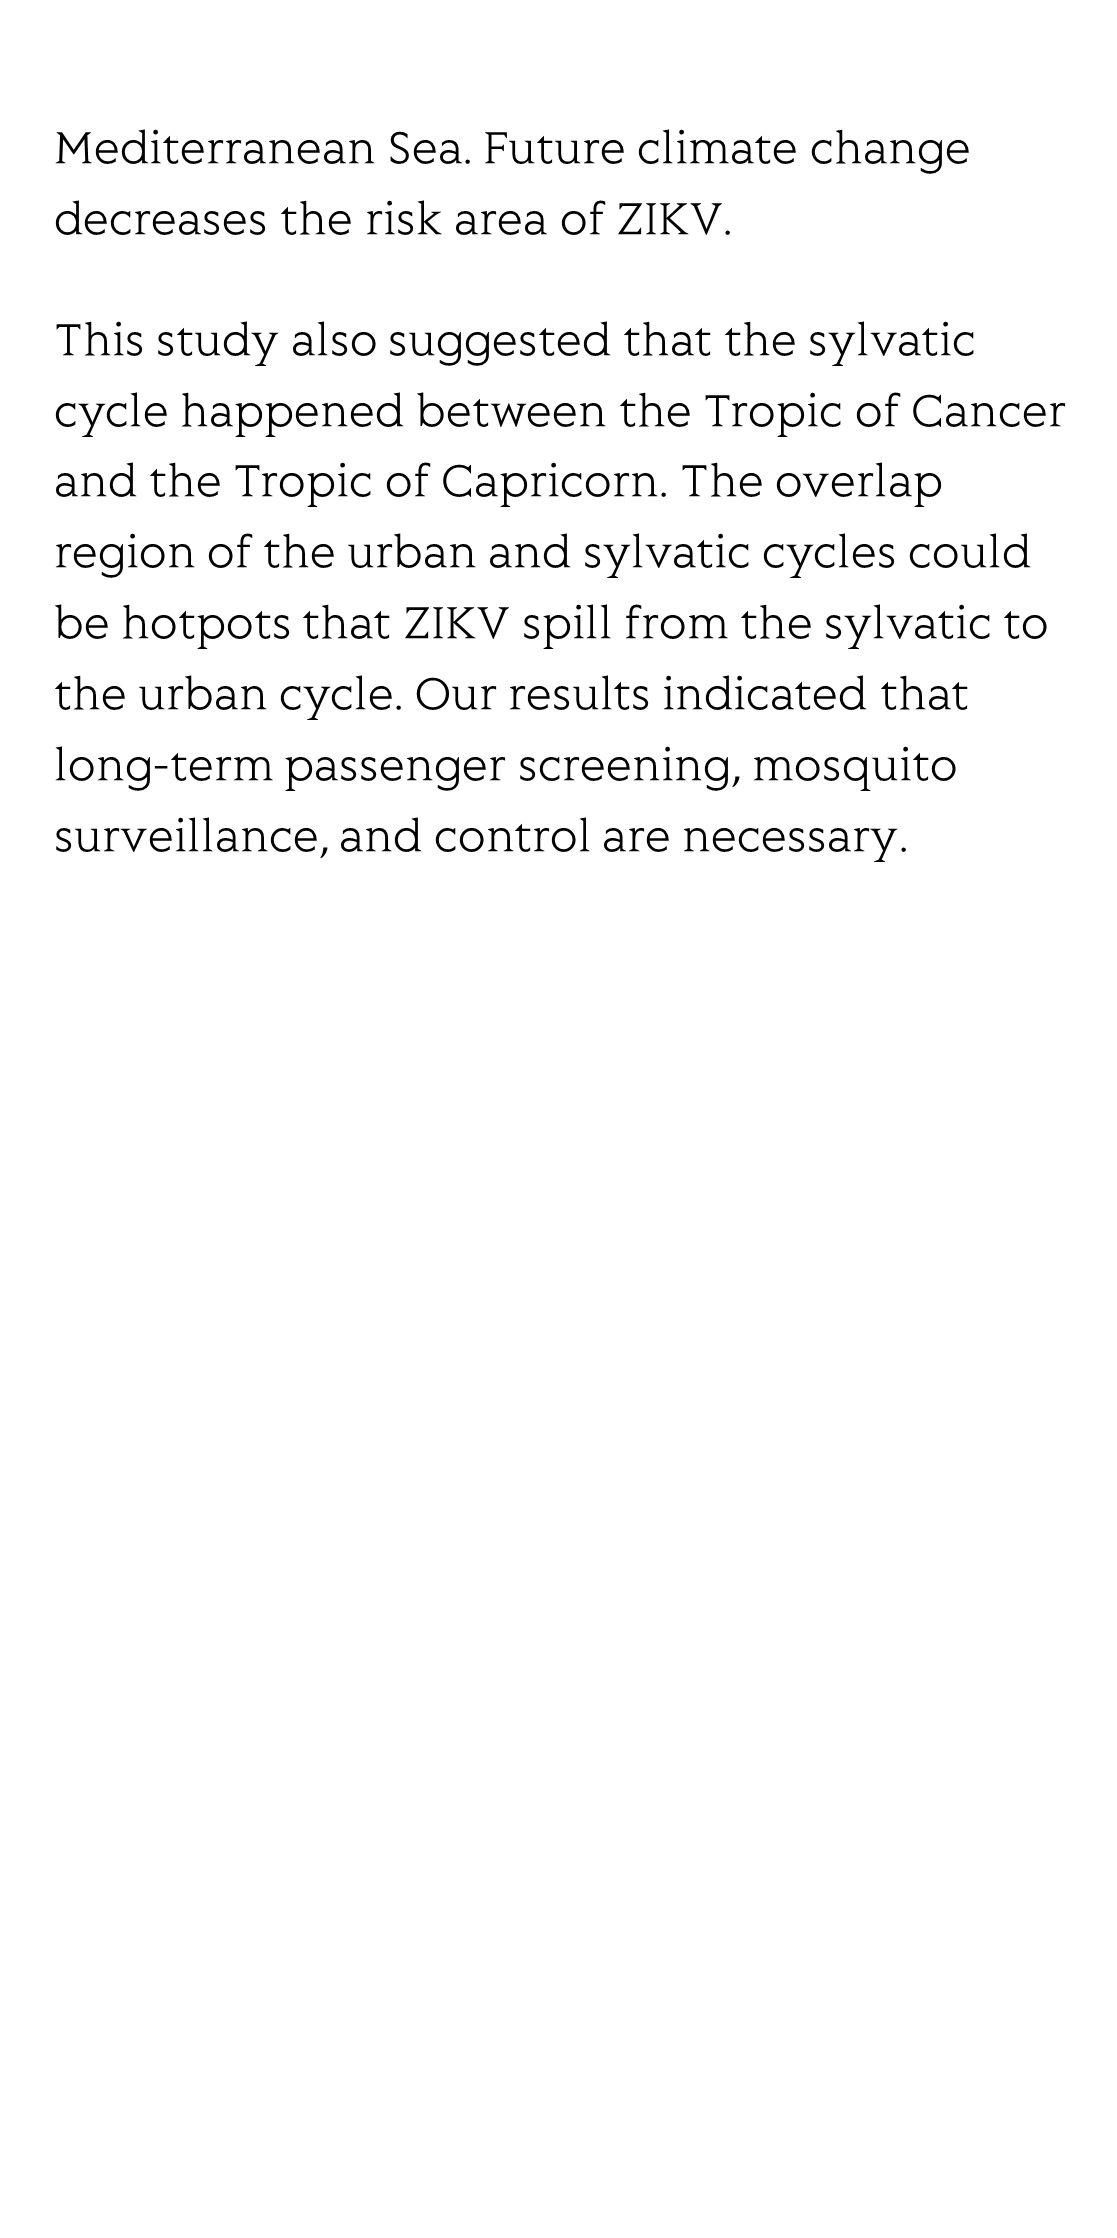 Assessing the risk of spread of zika virus under current and future climate scenarios_3